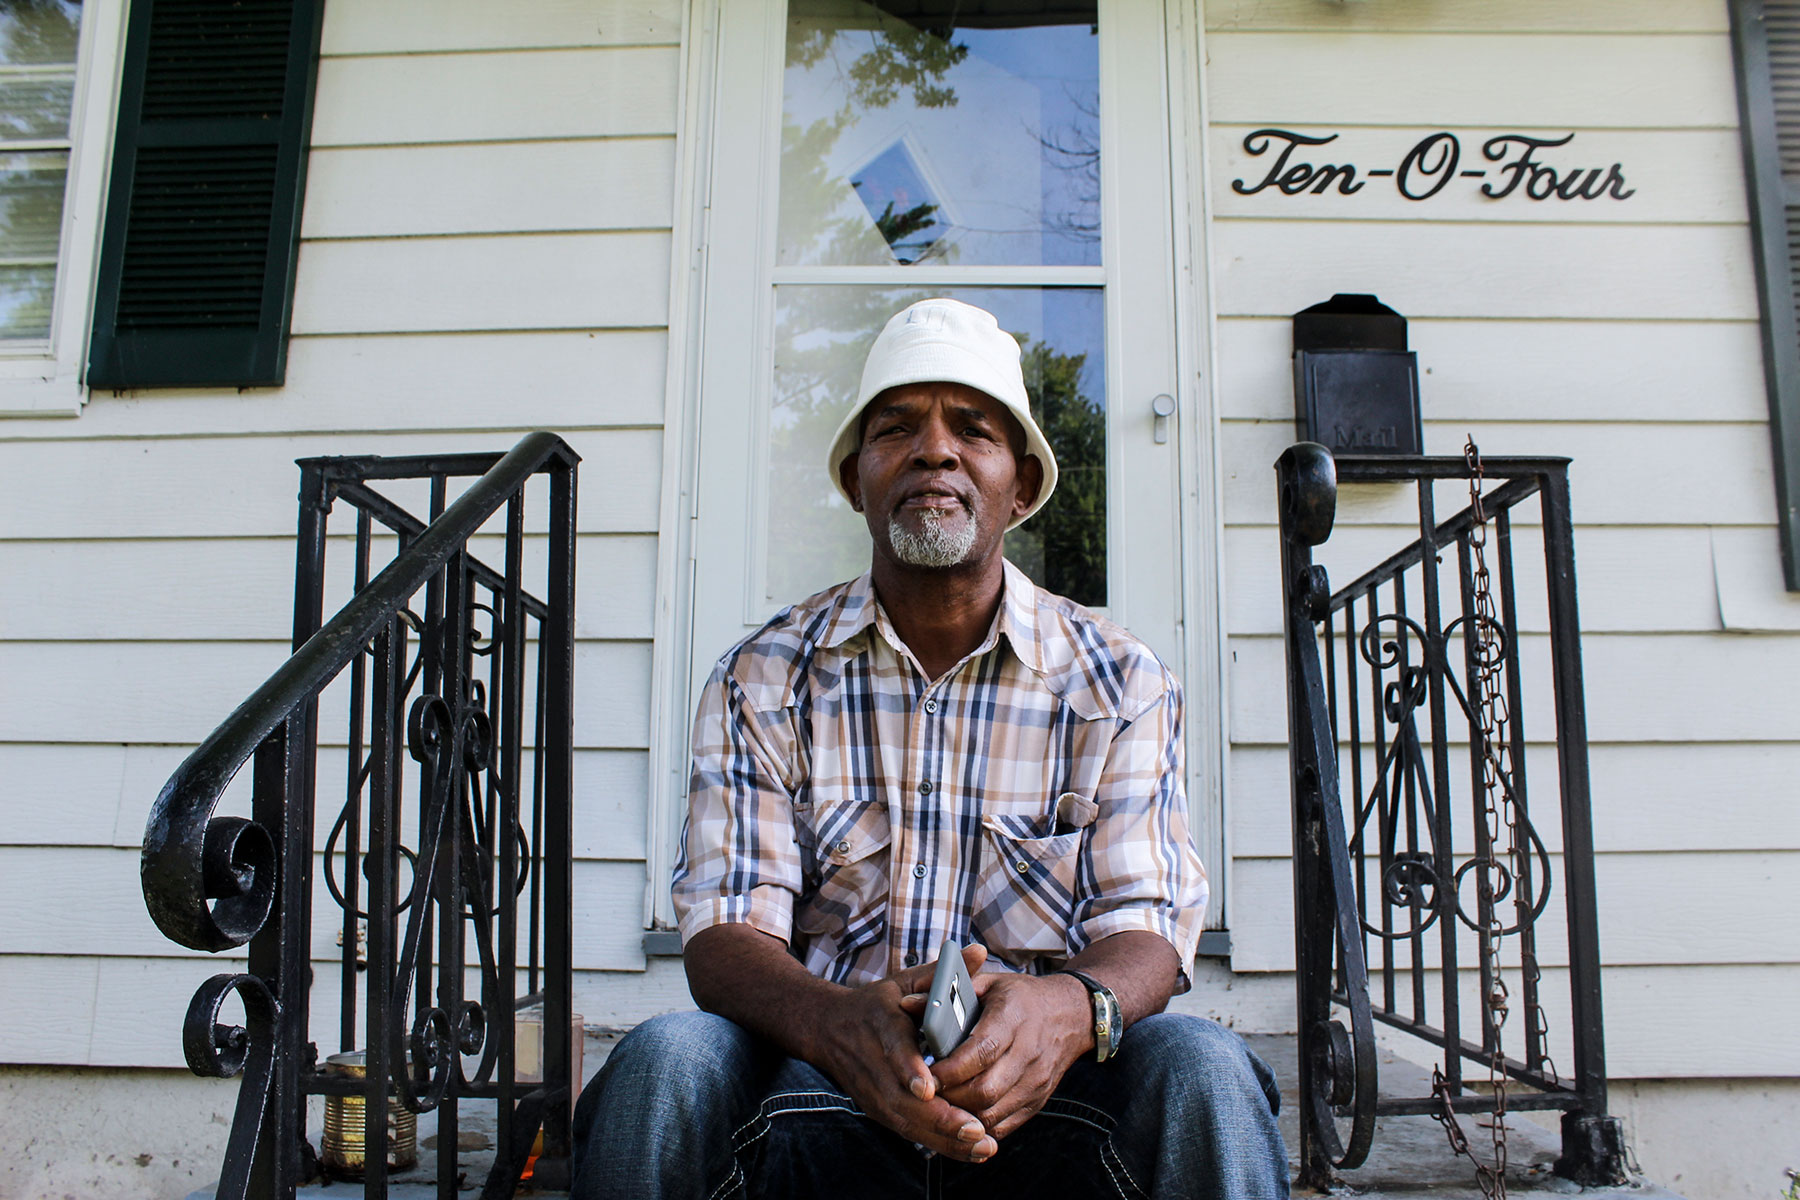 Longtime Ferguson resident Dennis Williams talks about how “things have begun to fall into place” since the killing of Michael Brown and the protests throughout the nation. He says the city has made changes and people are starting to “get up” and move on with their lives. (Phillip Jackson/News21)